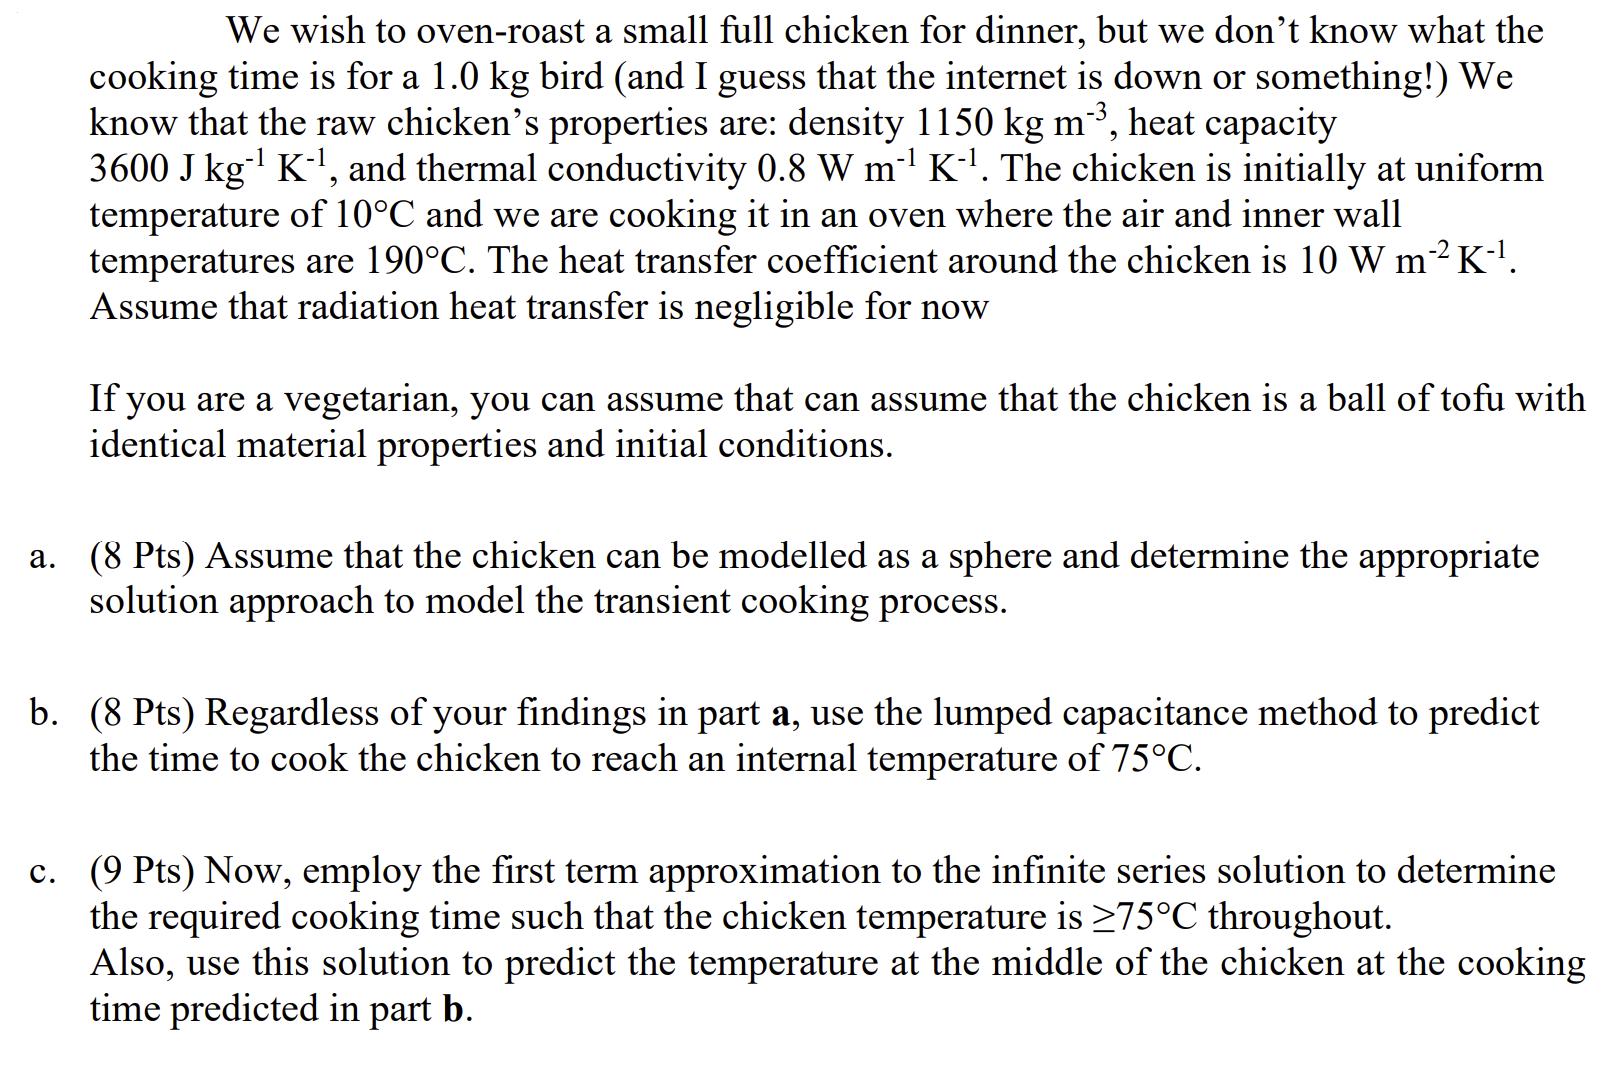 We wish to oven-roast a small full chicken for dinner, but we don't know what the cooking time is for a 1.0